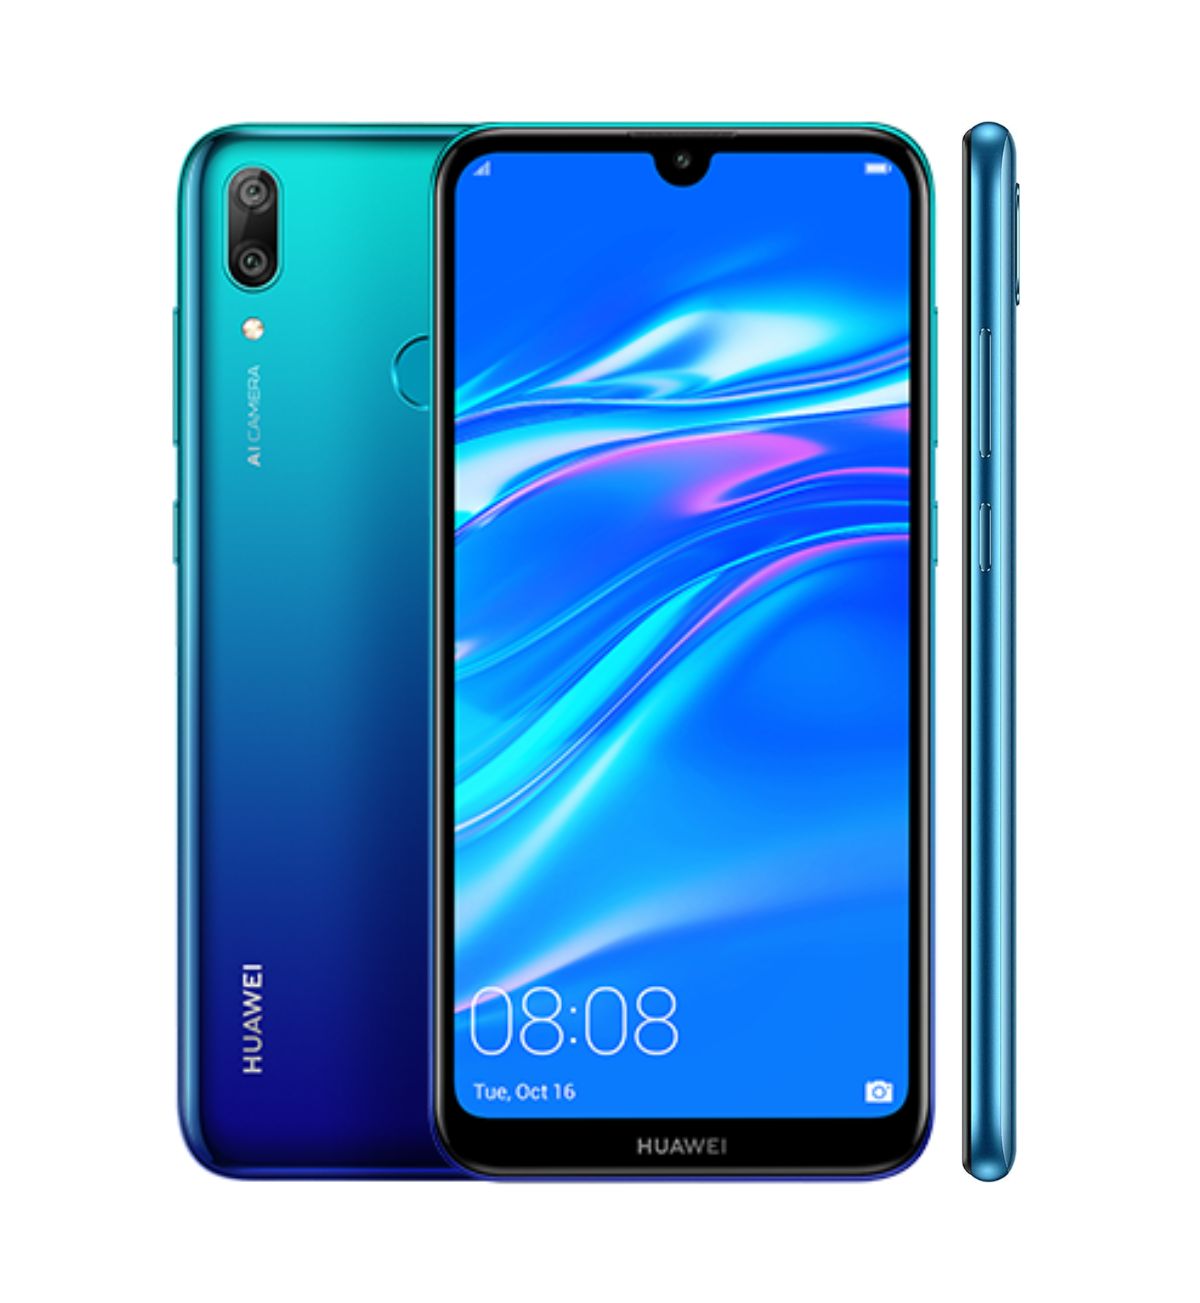 Image of the Huawei Y6 2019 (Sapphire Blue) showcasing its sleek design and dewdrop display.